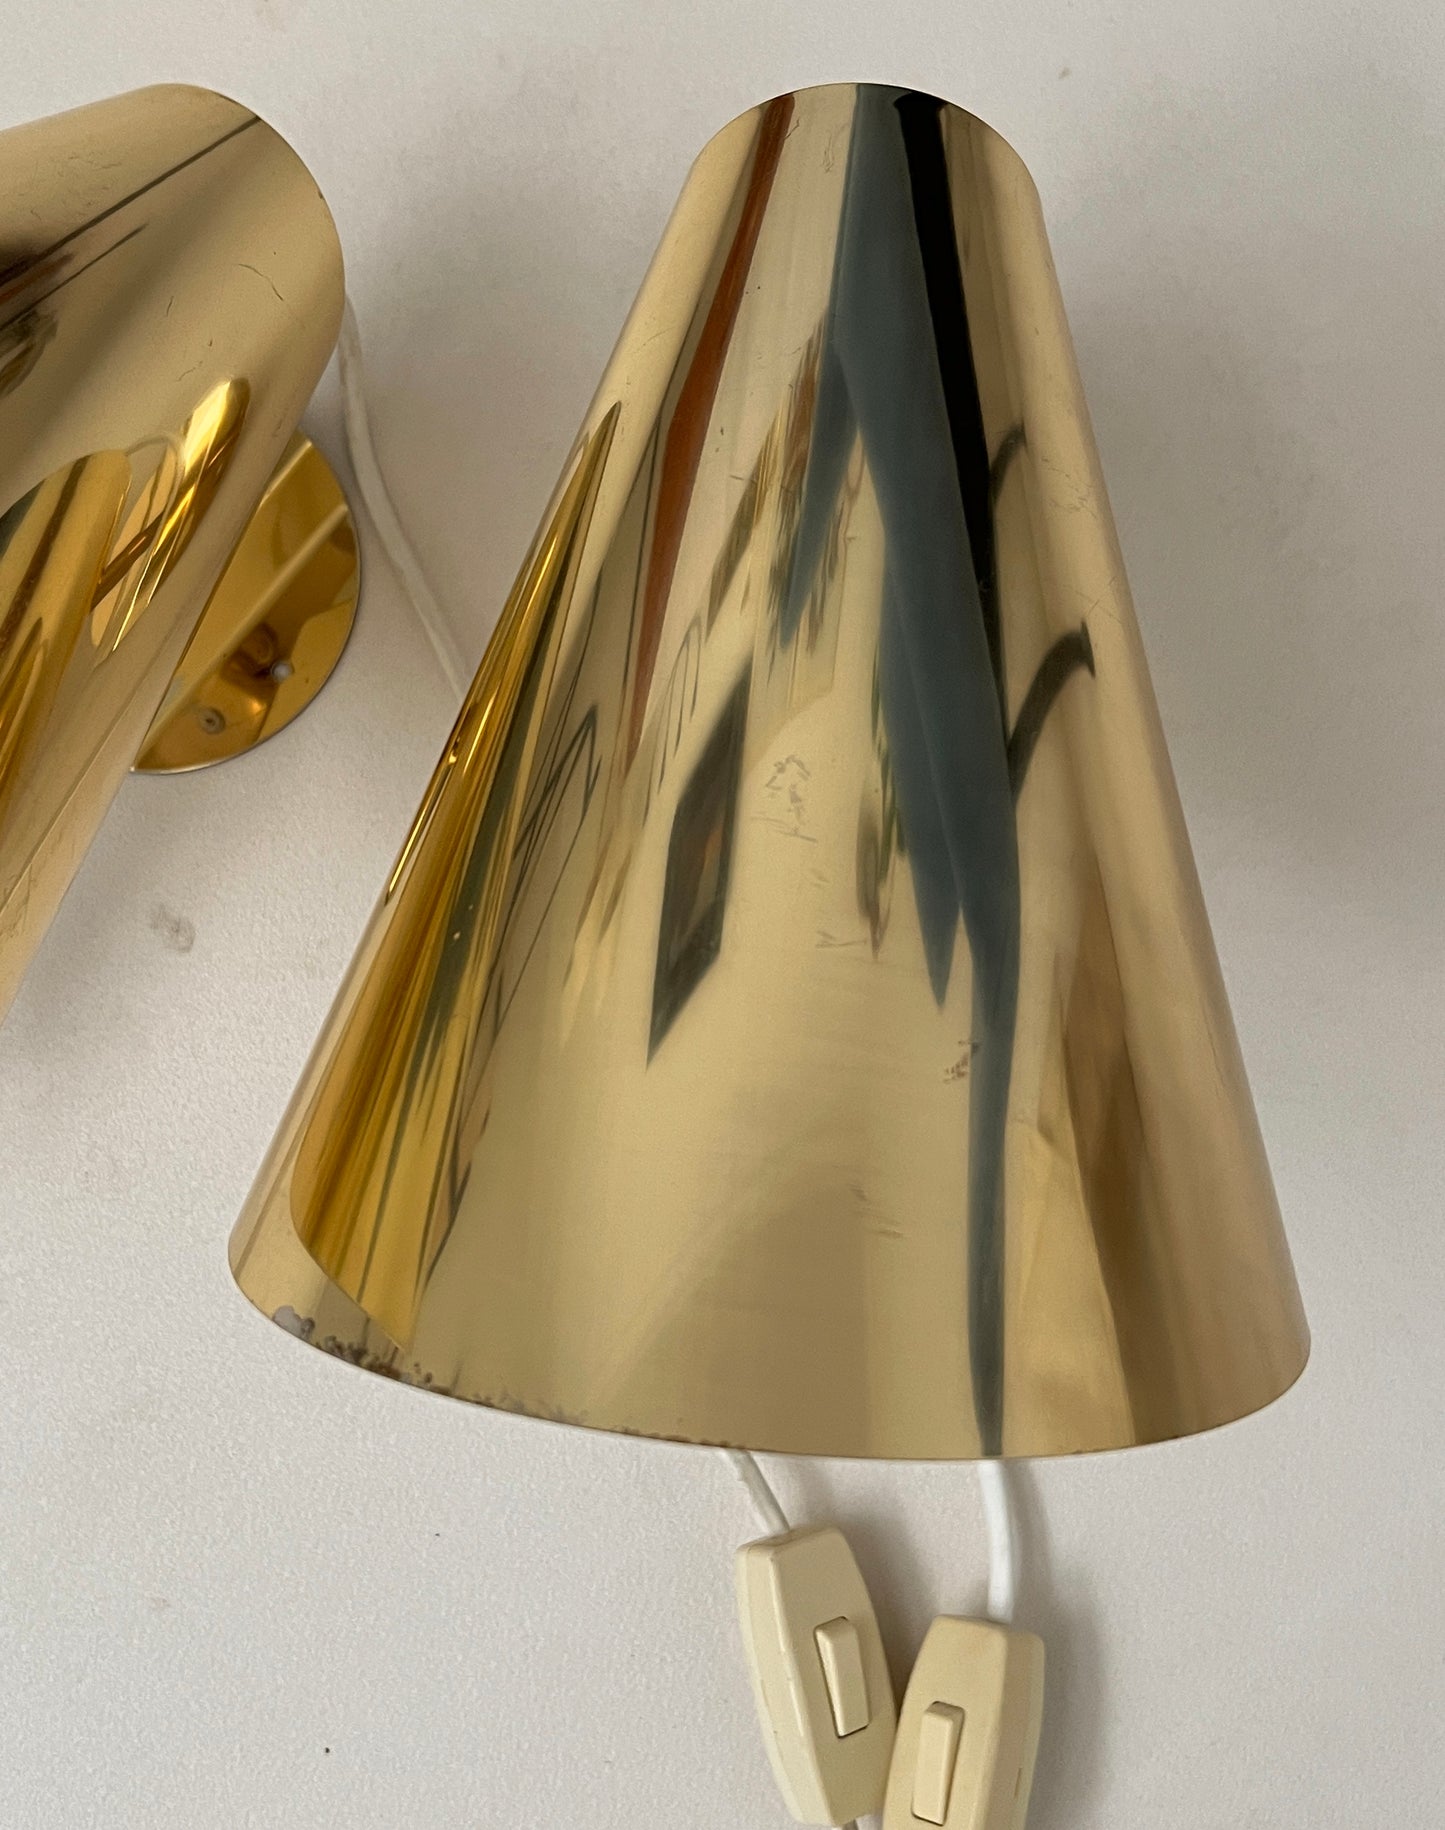 Pair of Brass Cone Sconces by Hans Agne Jakobsson, Sweden